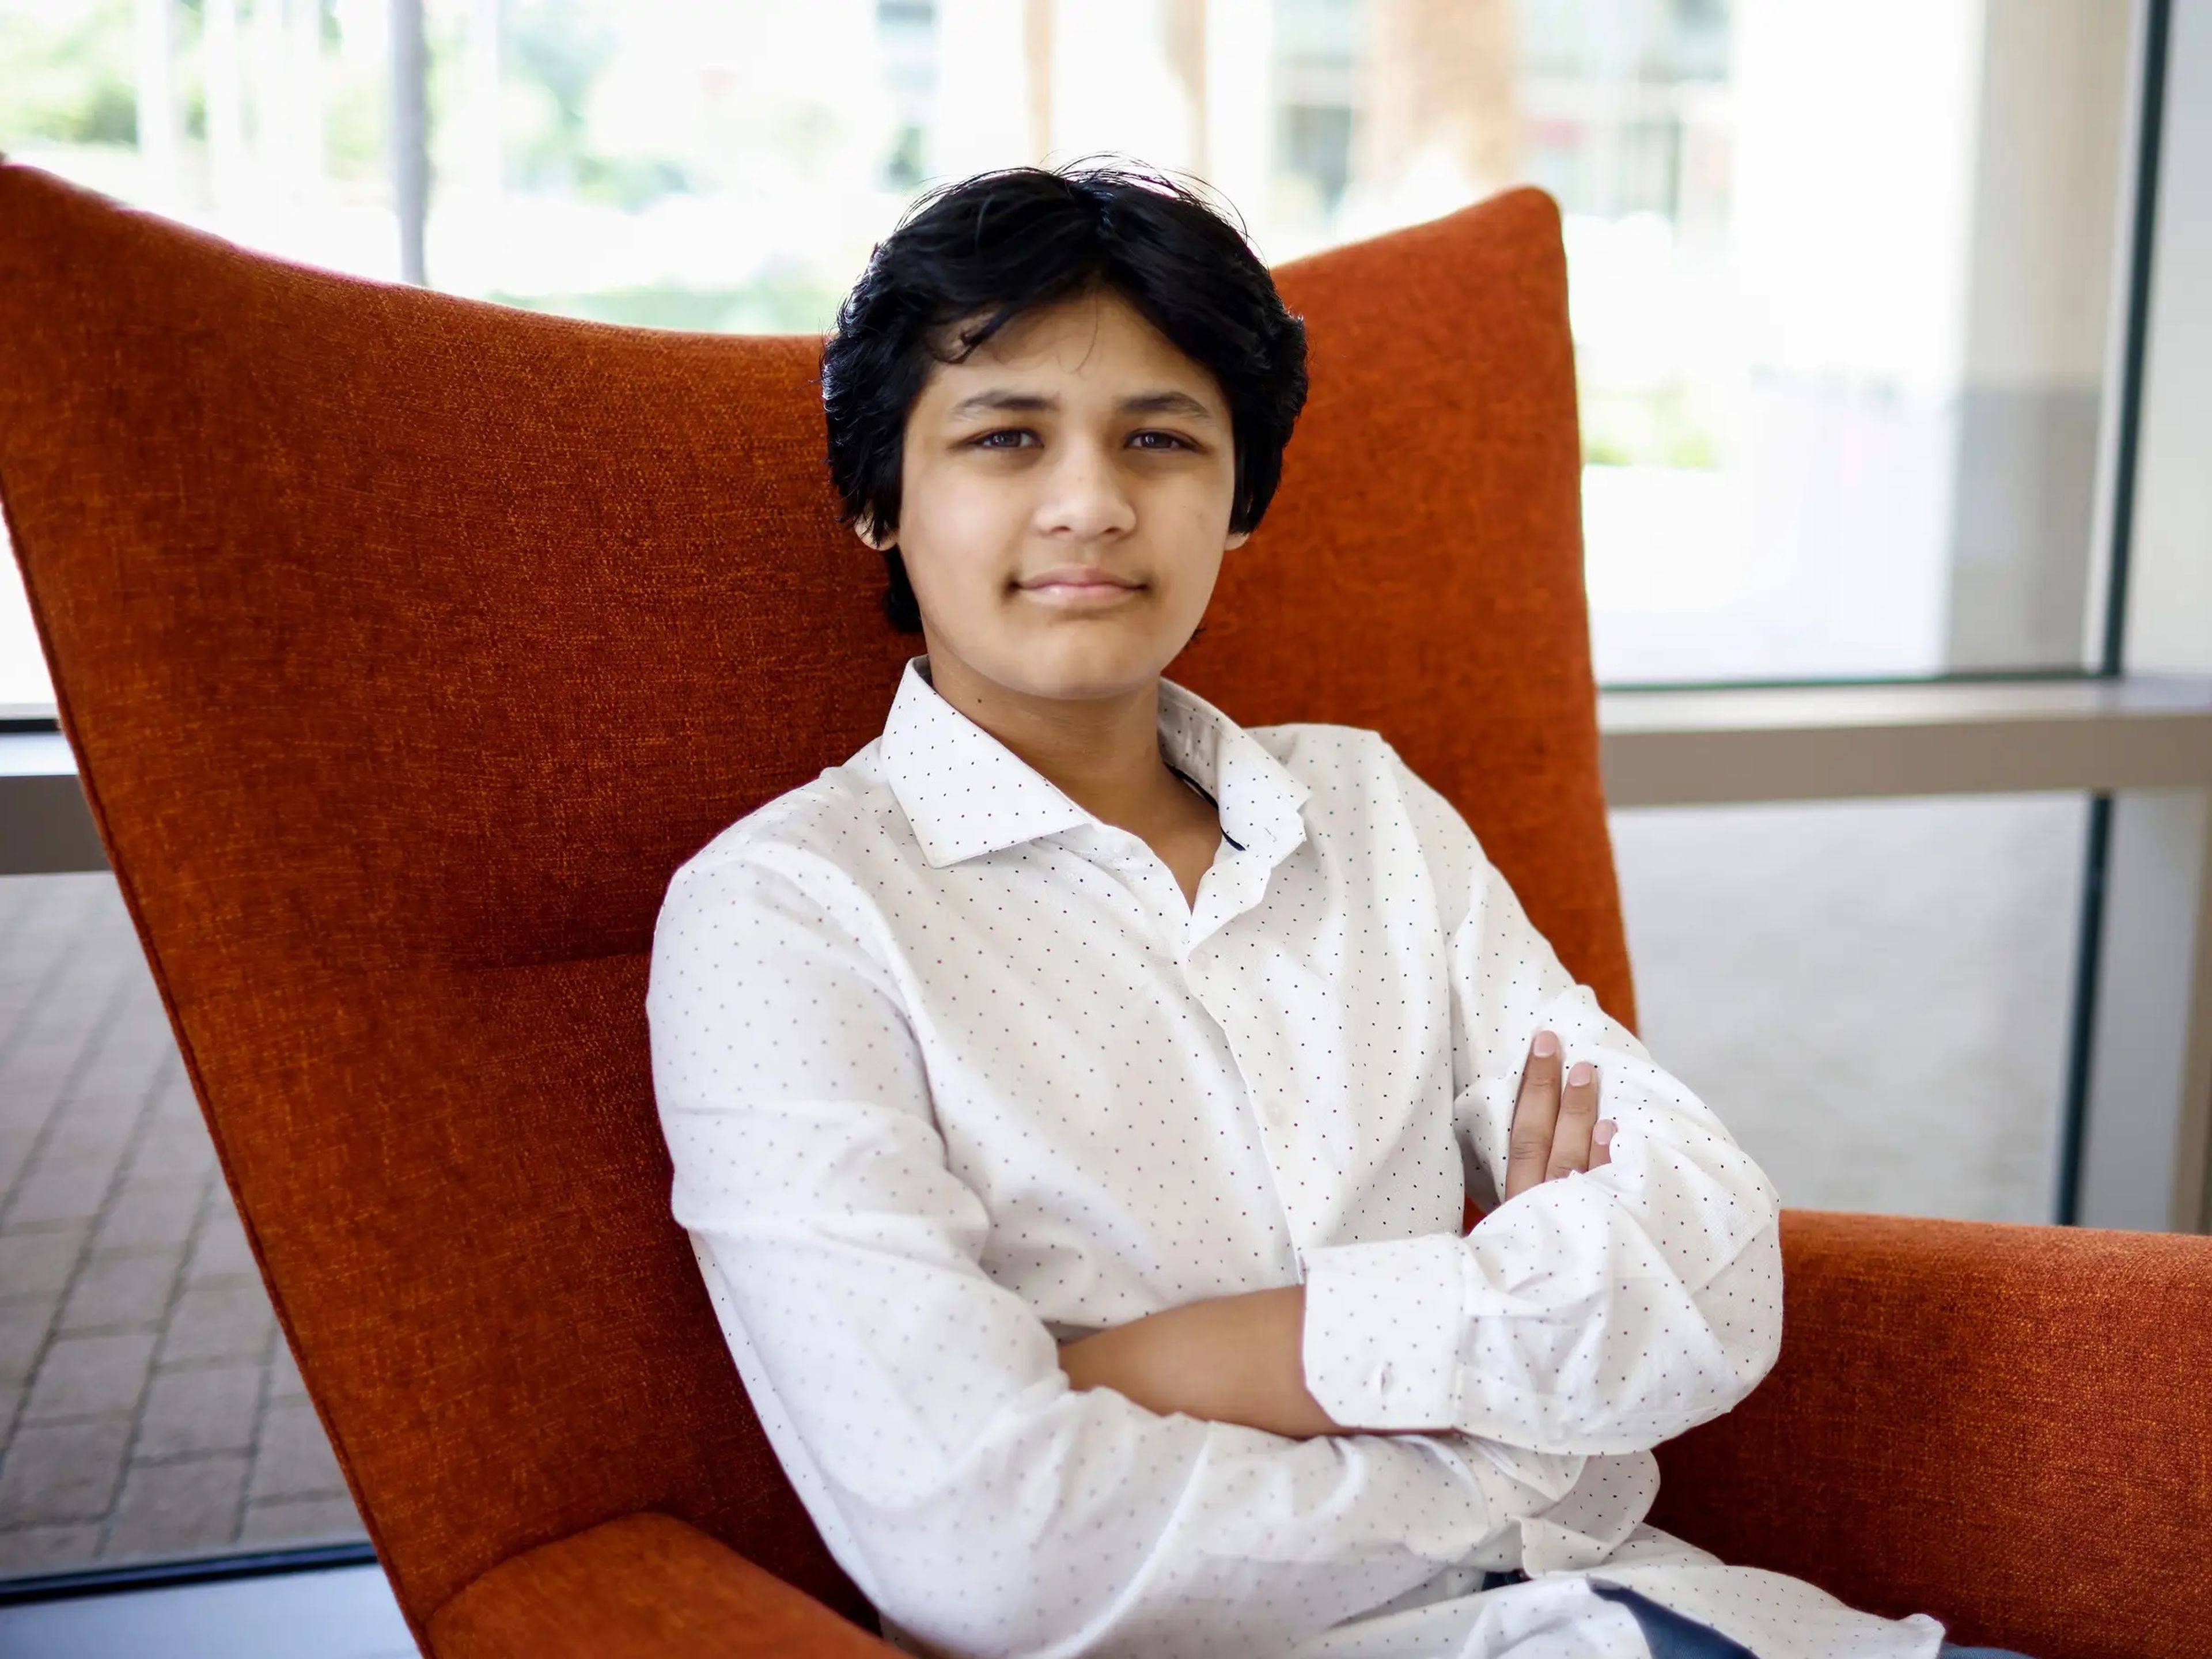 Kairan Quazi wearing a white collared shirt and crossing his arms whilst sat in a red chair